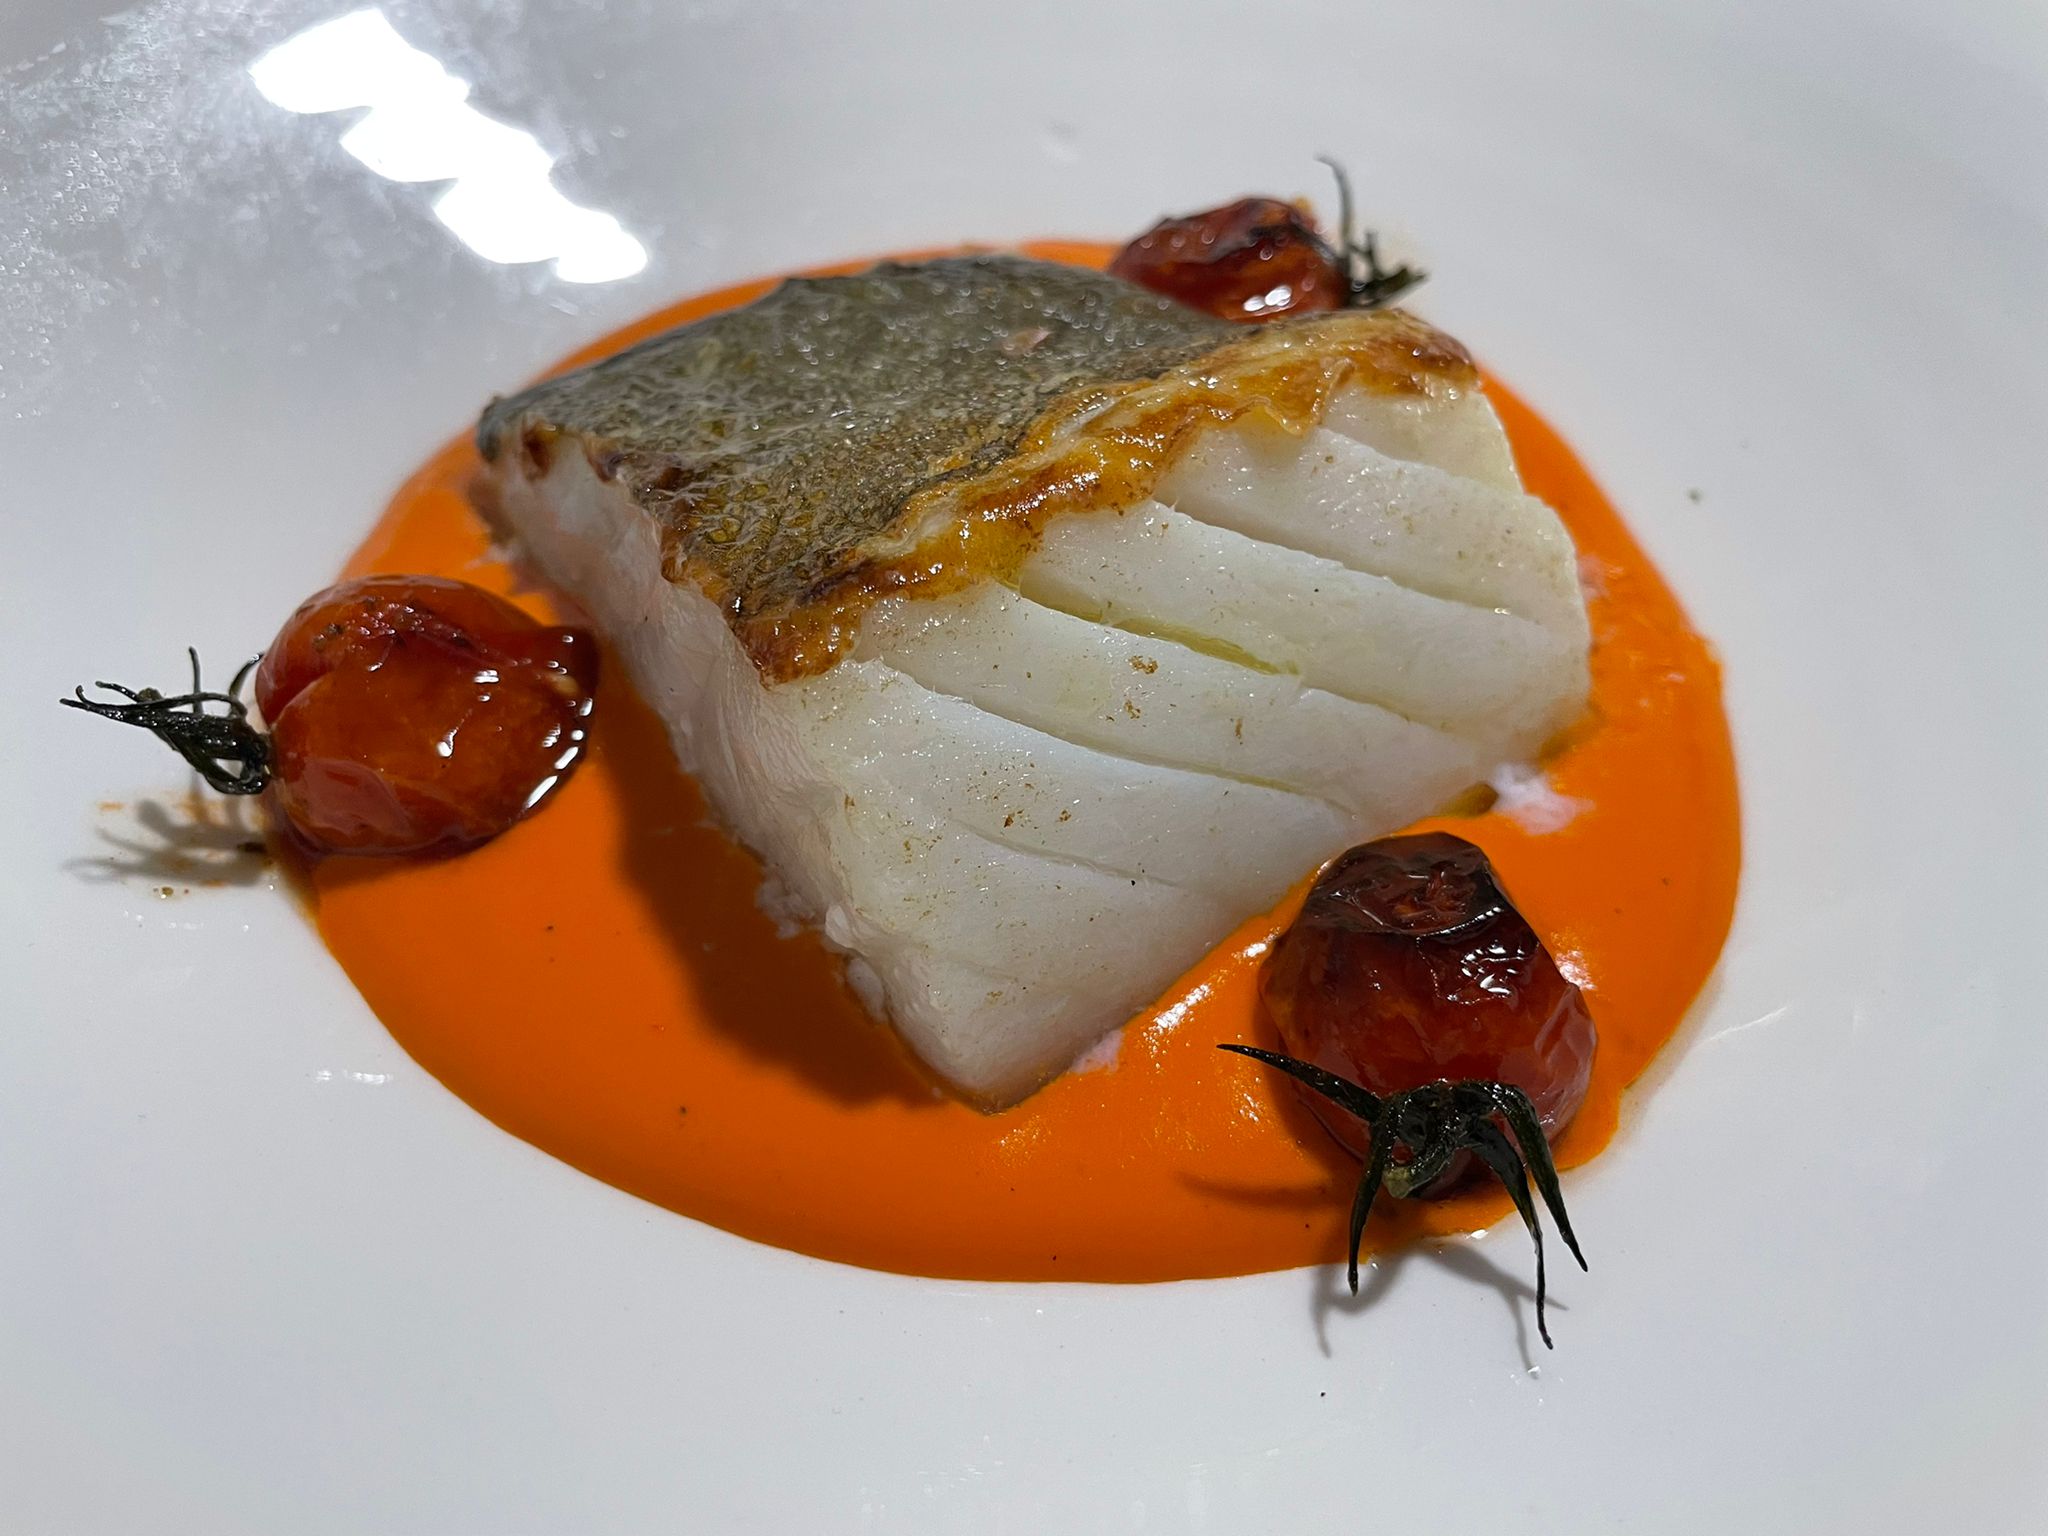 Cod loin with piquillo peppers